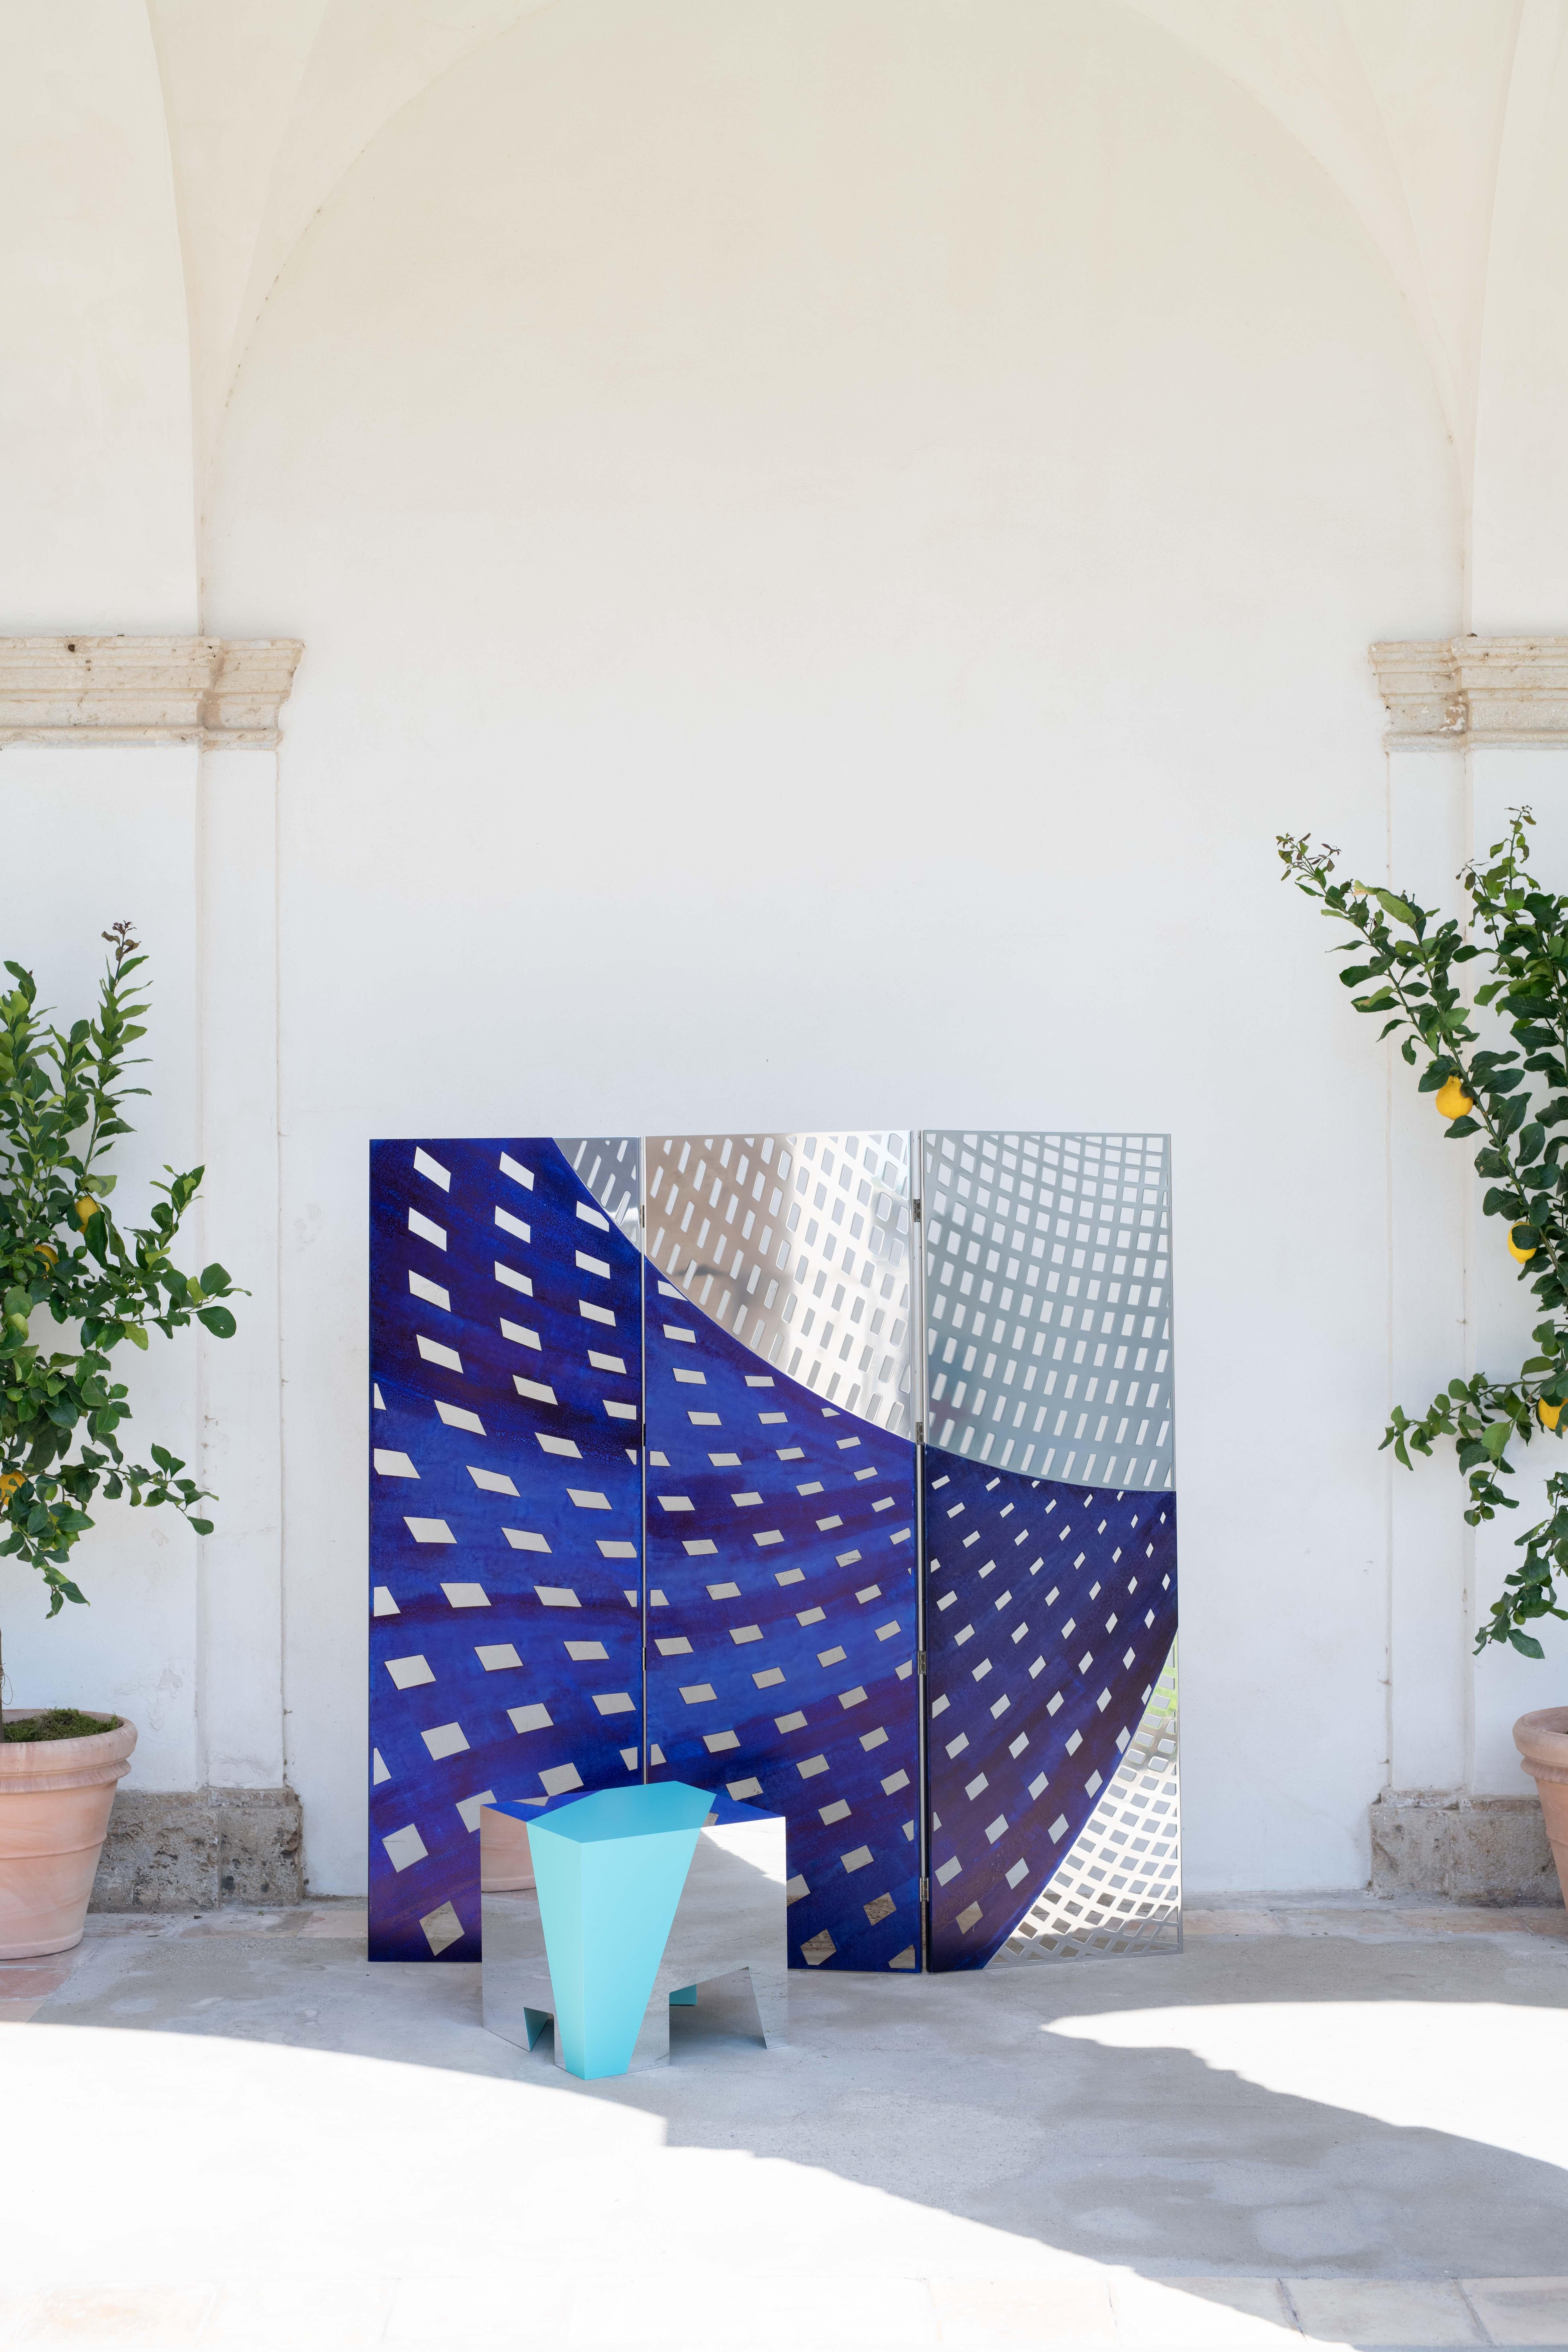 The Otto screen, designed by Doriana and Massimiliano Fuksas is among the protagonists of this special collection: mirrored finishes that reflected the colors of the sea, Prussian blue waves and the materiality of pure aluminum characterize the